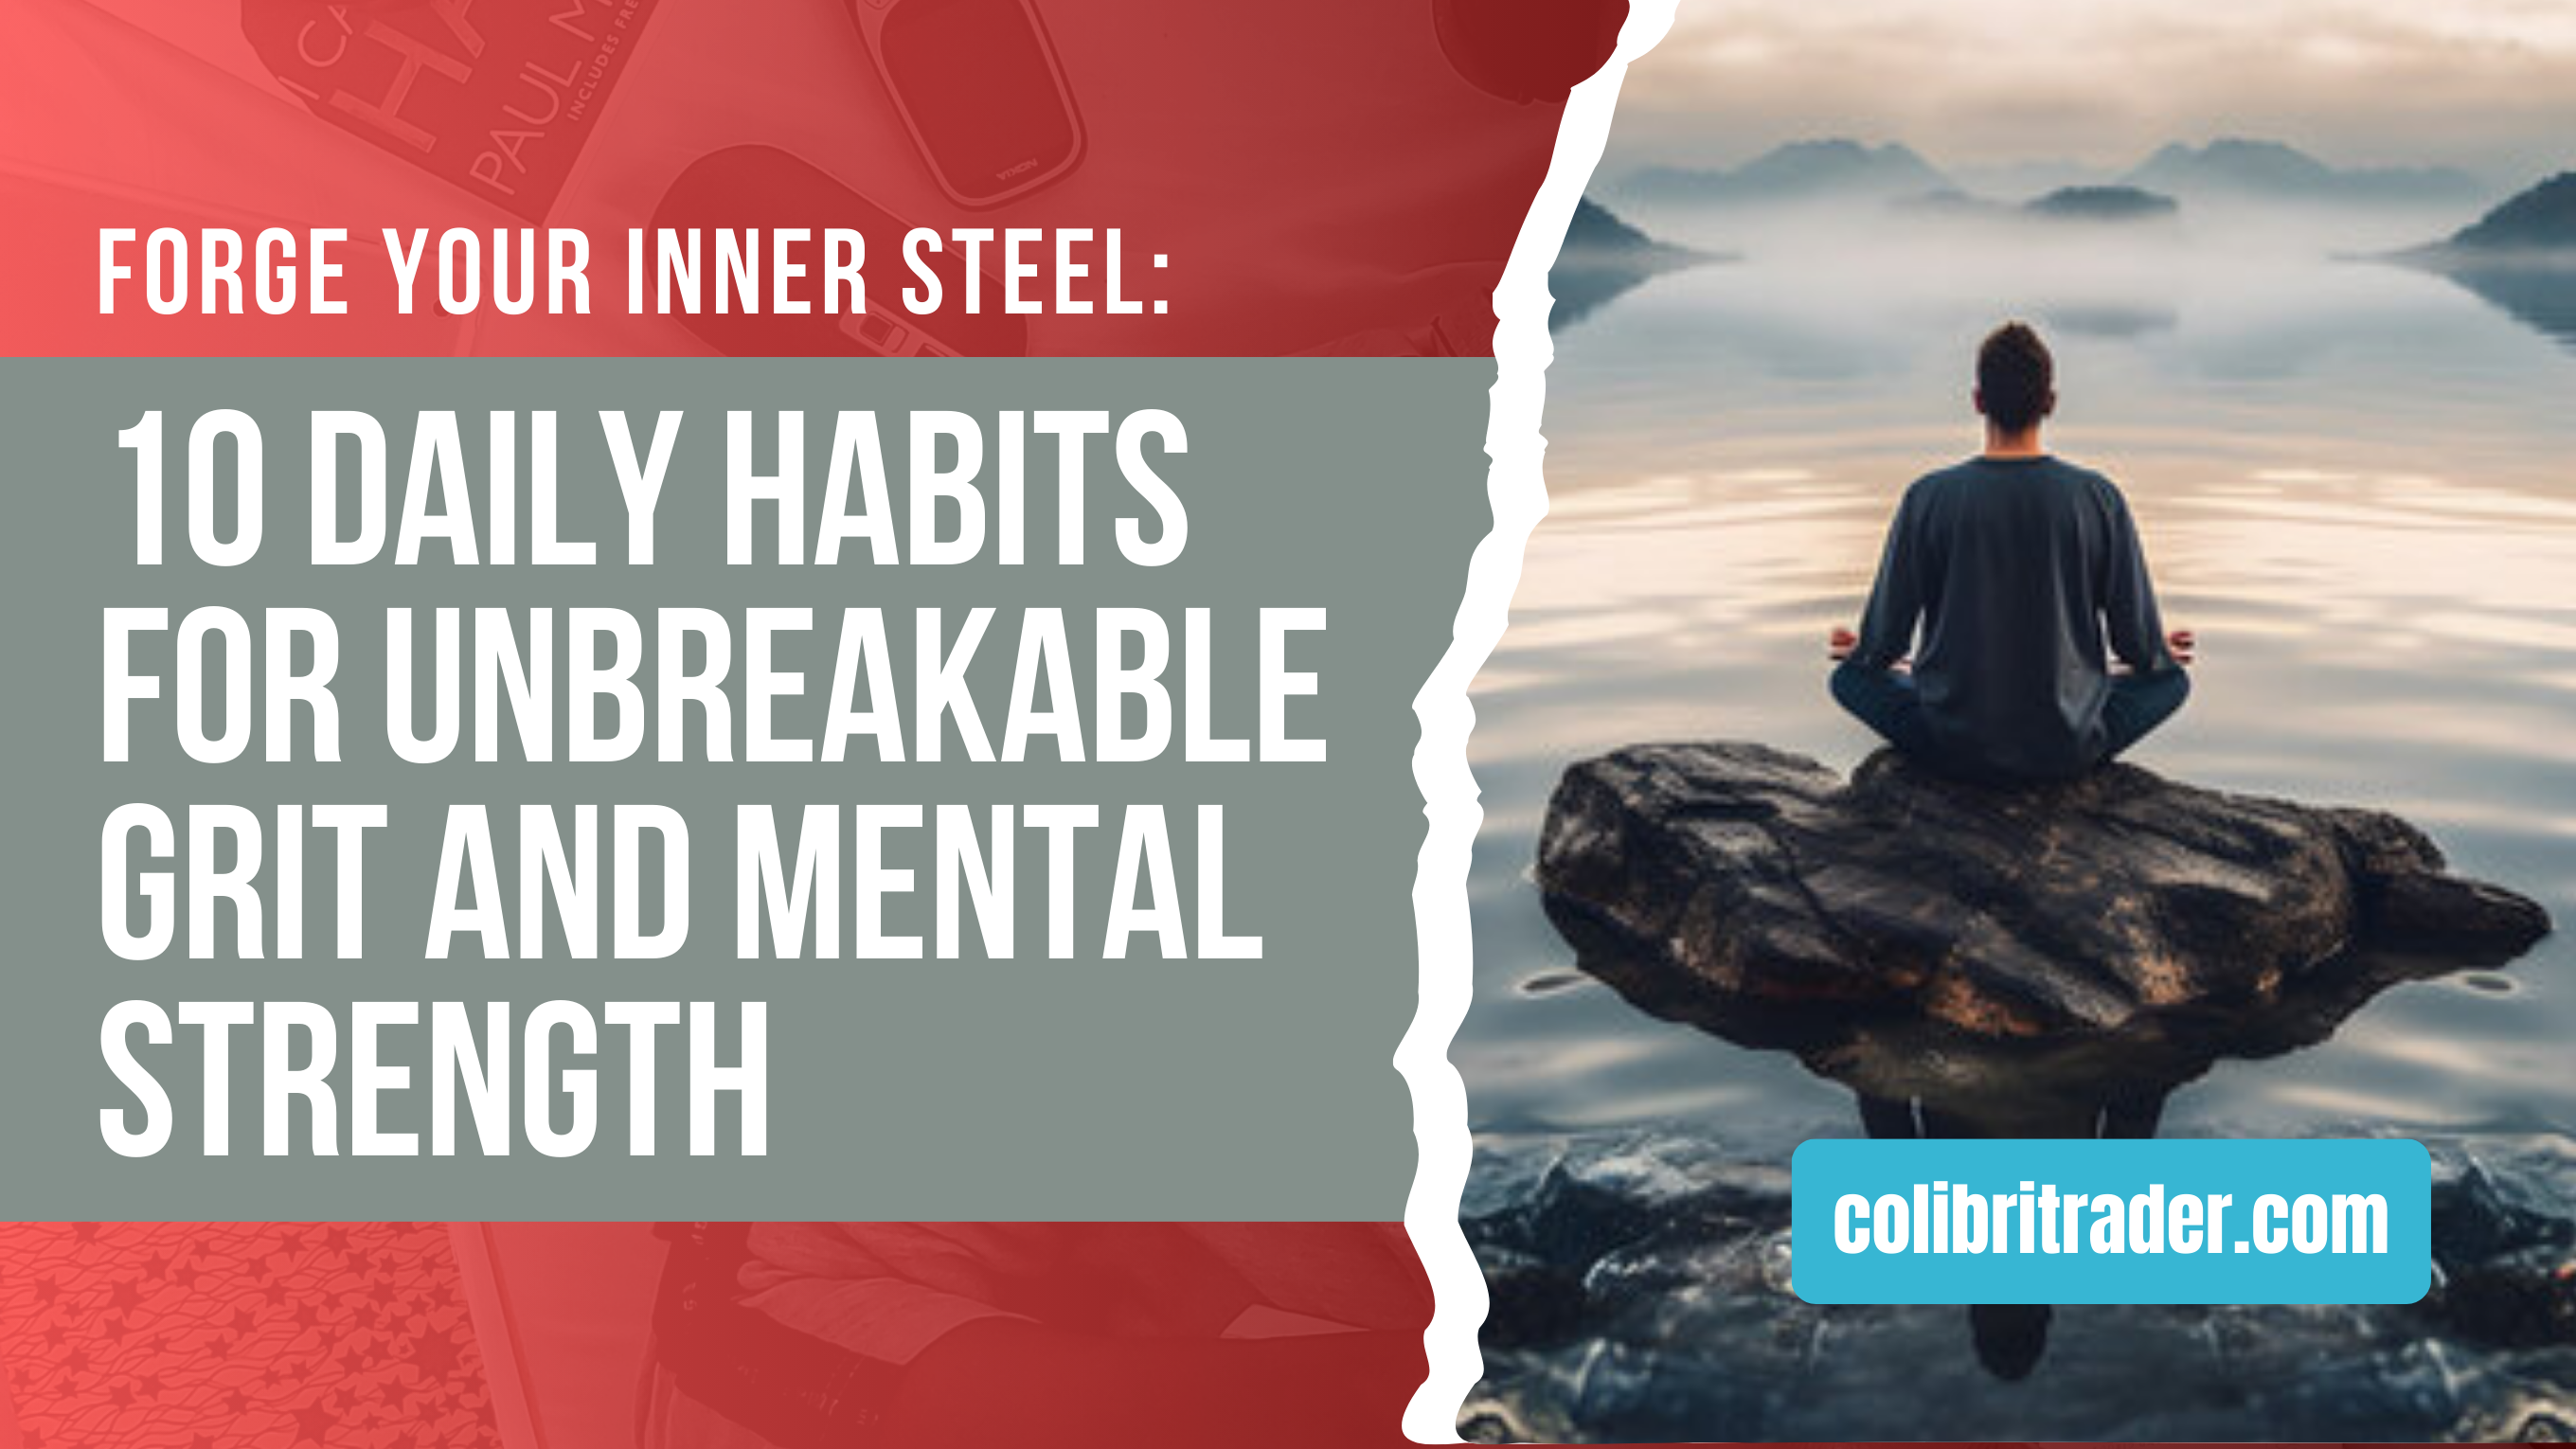 Forge Your Inner Steel: 10 Daily Habits for Unbreakable Grit and Mental Strength